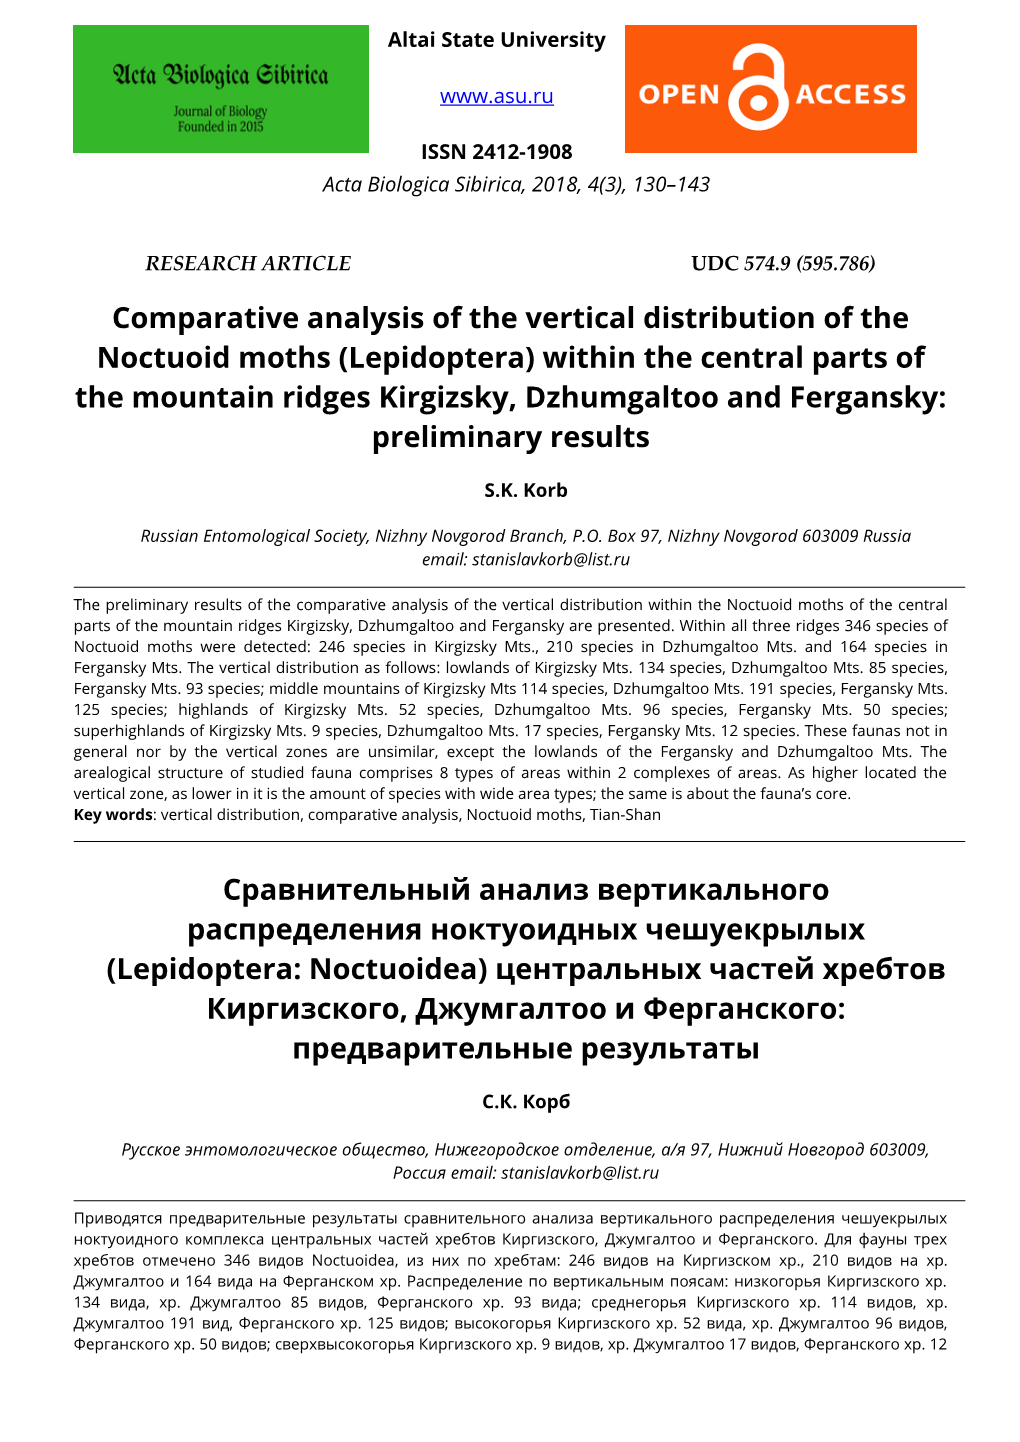 Comparative Analysis of the Vertical Distribution of the Noctuoid Moths